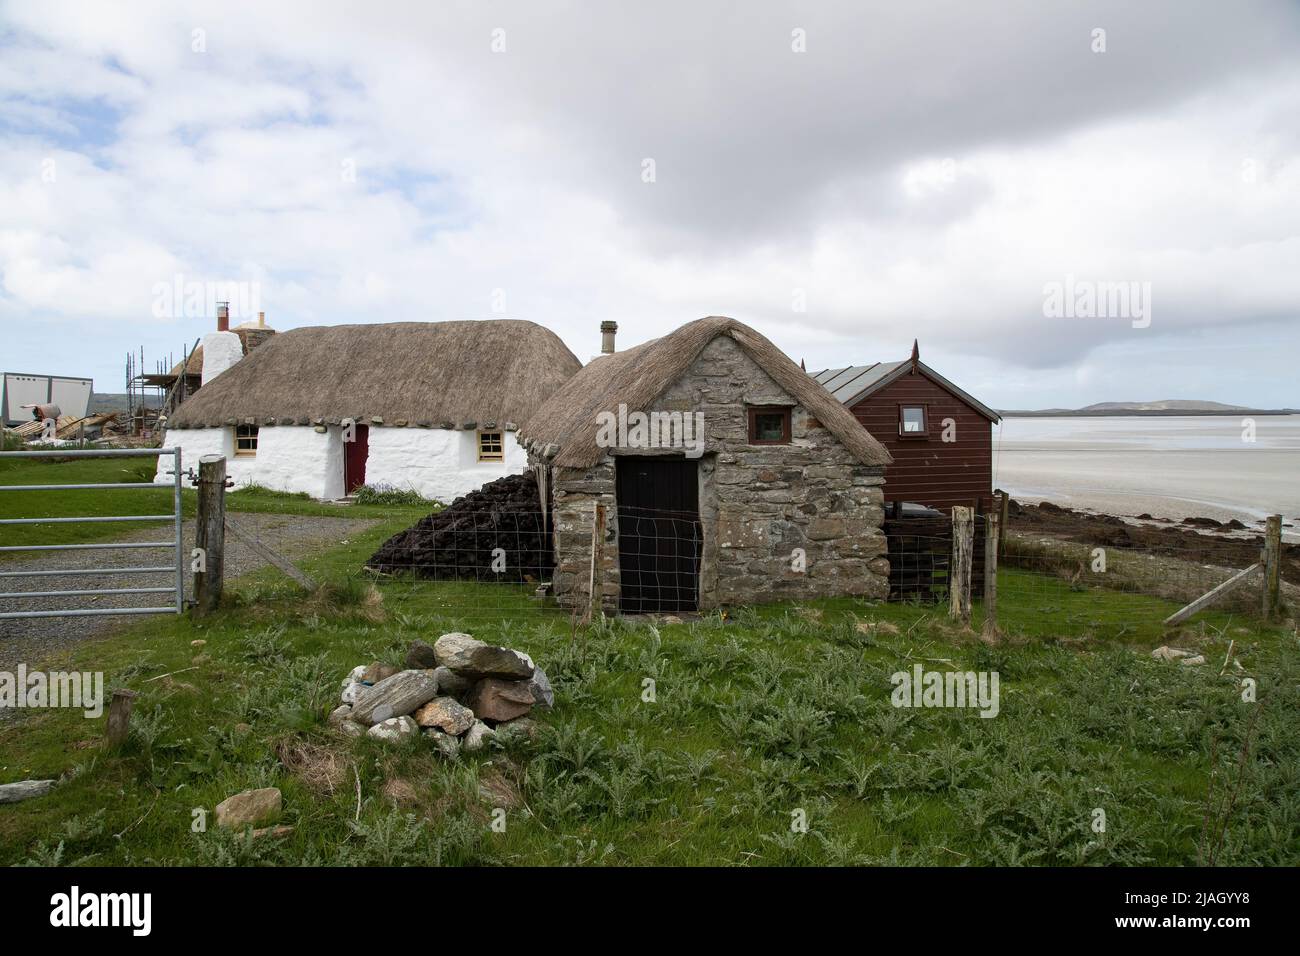 Traditional 19th century crofters stone cottages with thatched roofs near Sollas on North Uist, Outer Hebrides, Scotland. Stock Photo